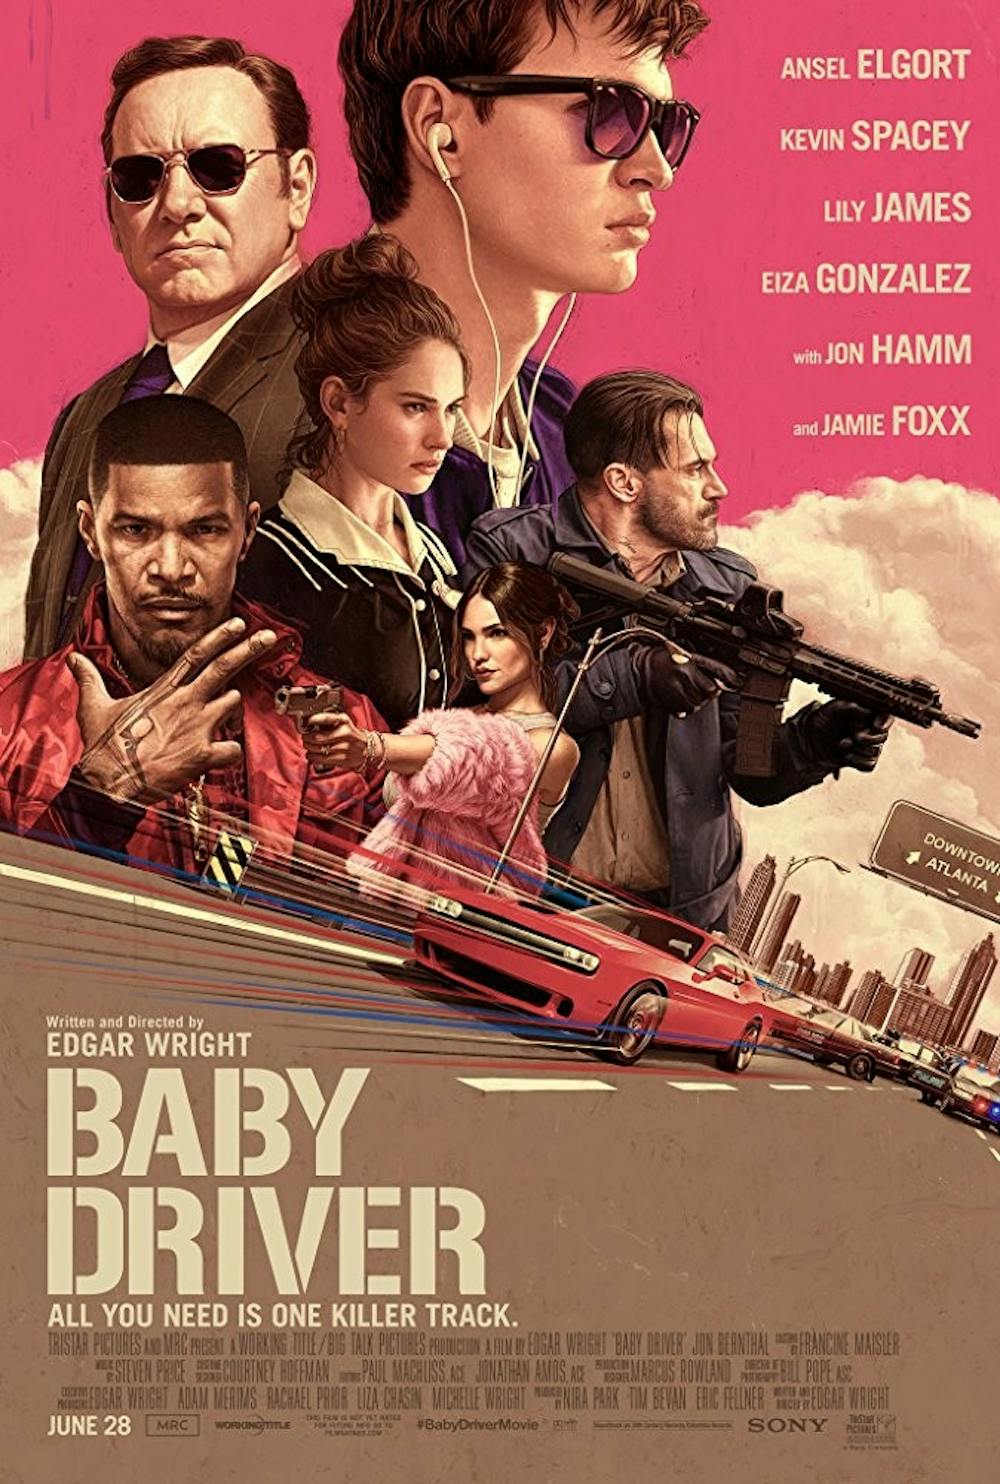 &nbsp;“Baby Driver Volume 2: The Score for a Score” was released on Friday.&nbsp;